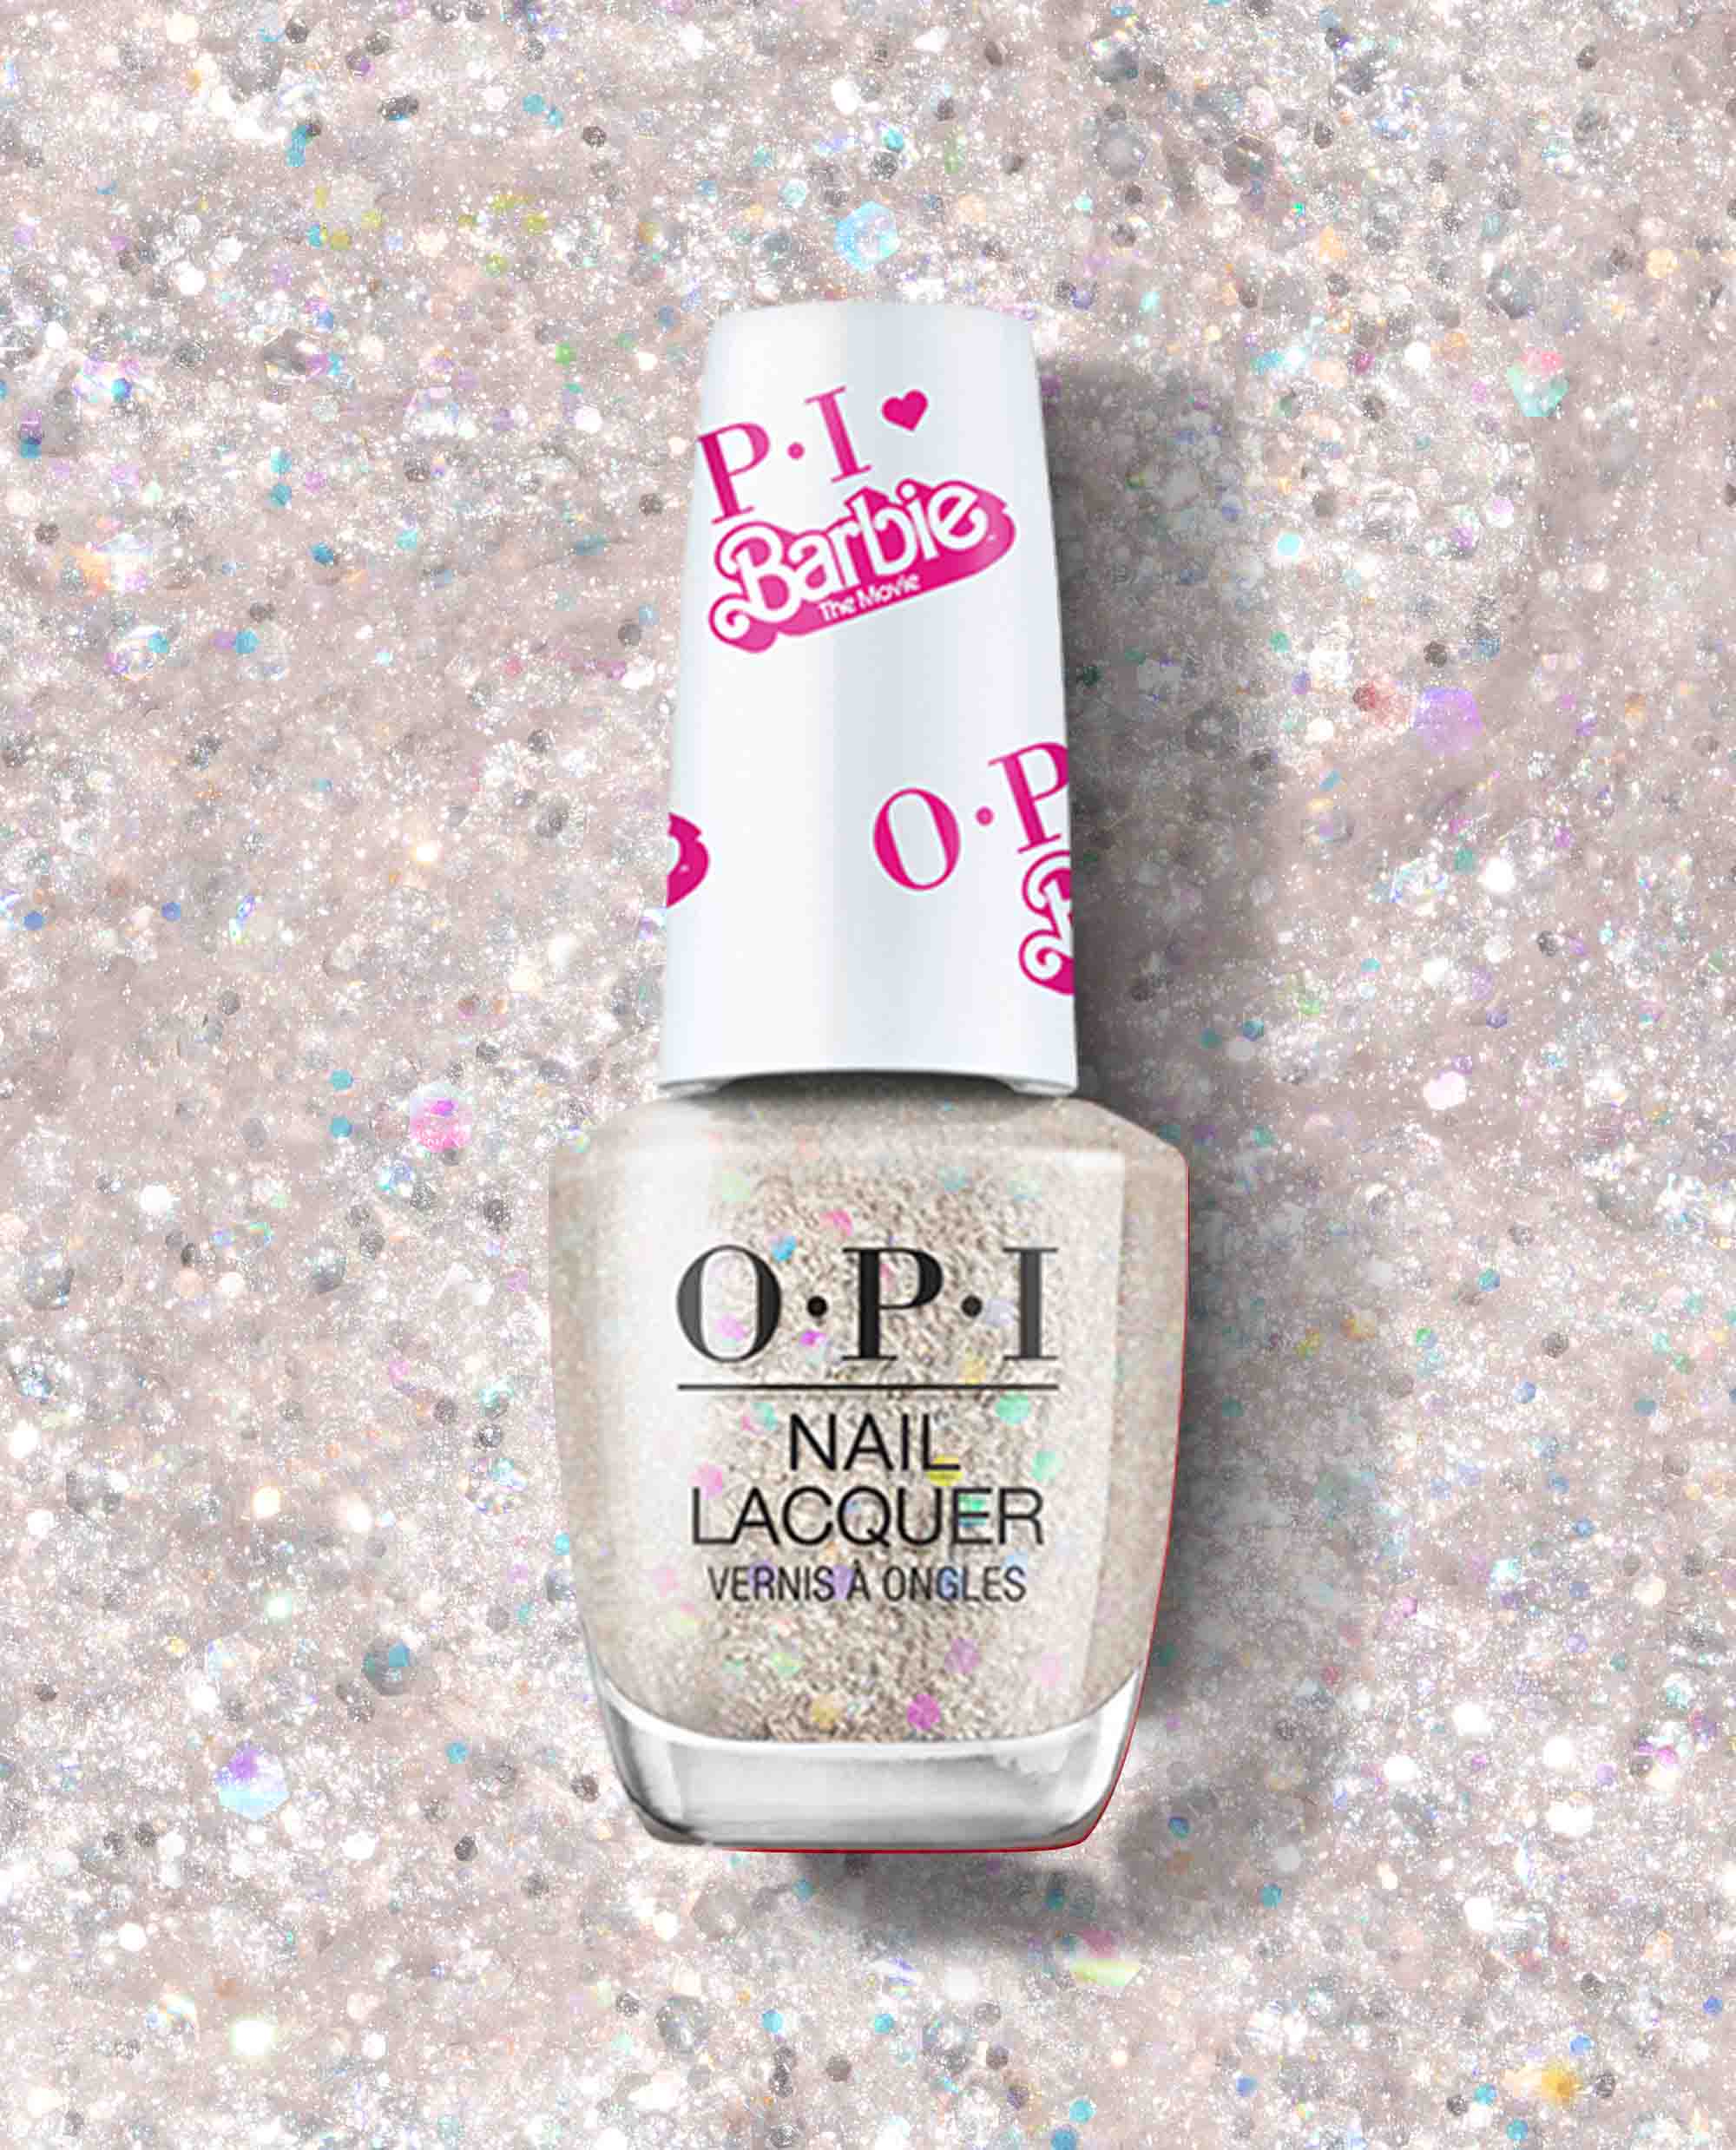 New in OPI Terribly Nice collection 💫🎁🎅🏼 Shop an extra 20% OFF  everything OPI, use code NICE20 at checkout! - Nail Polish Direct